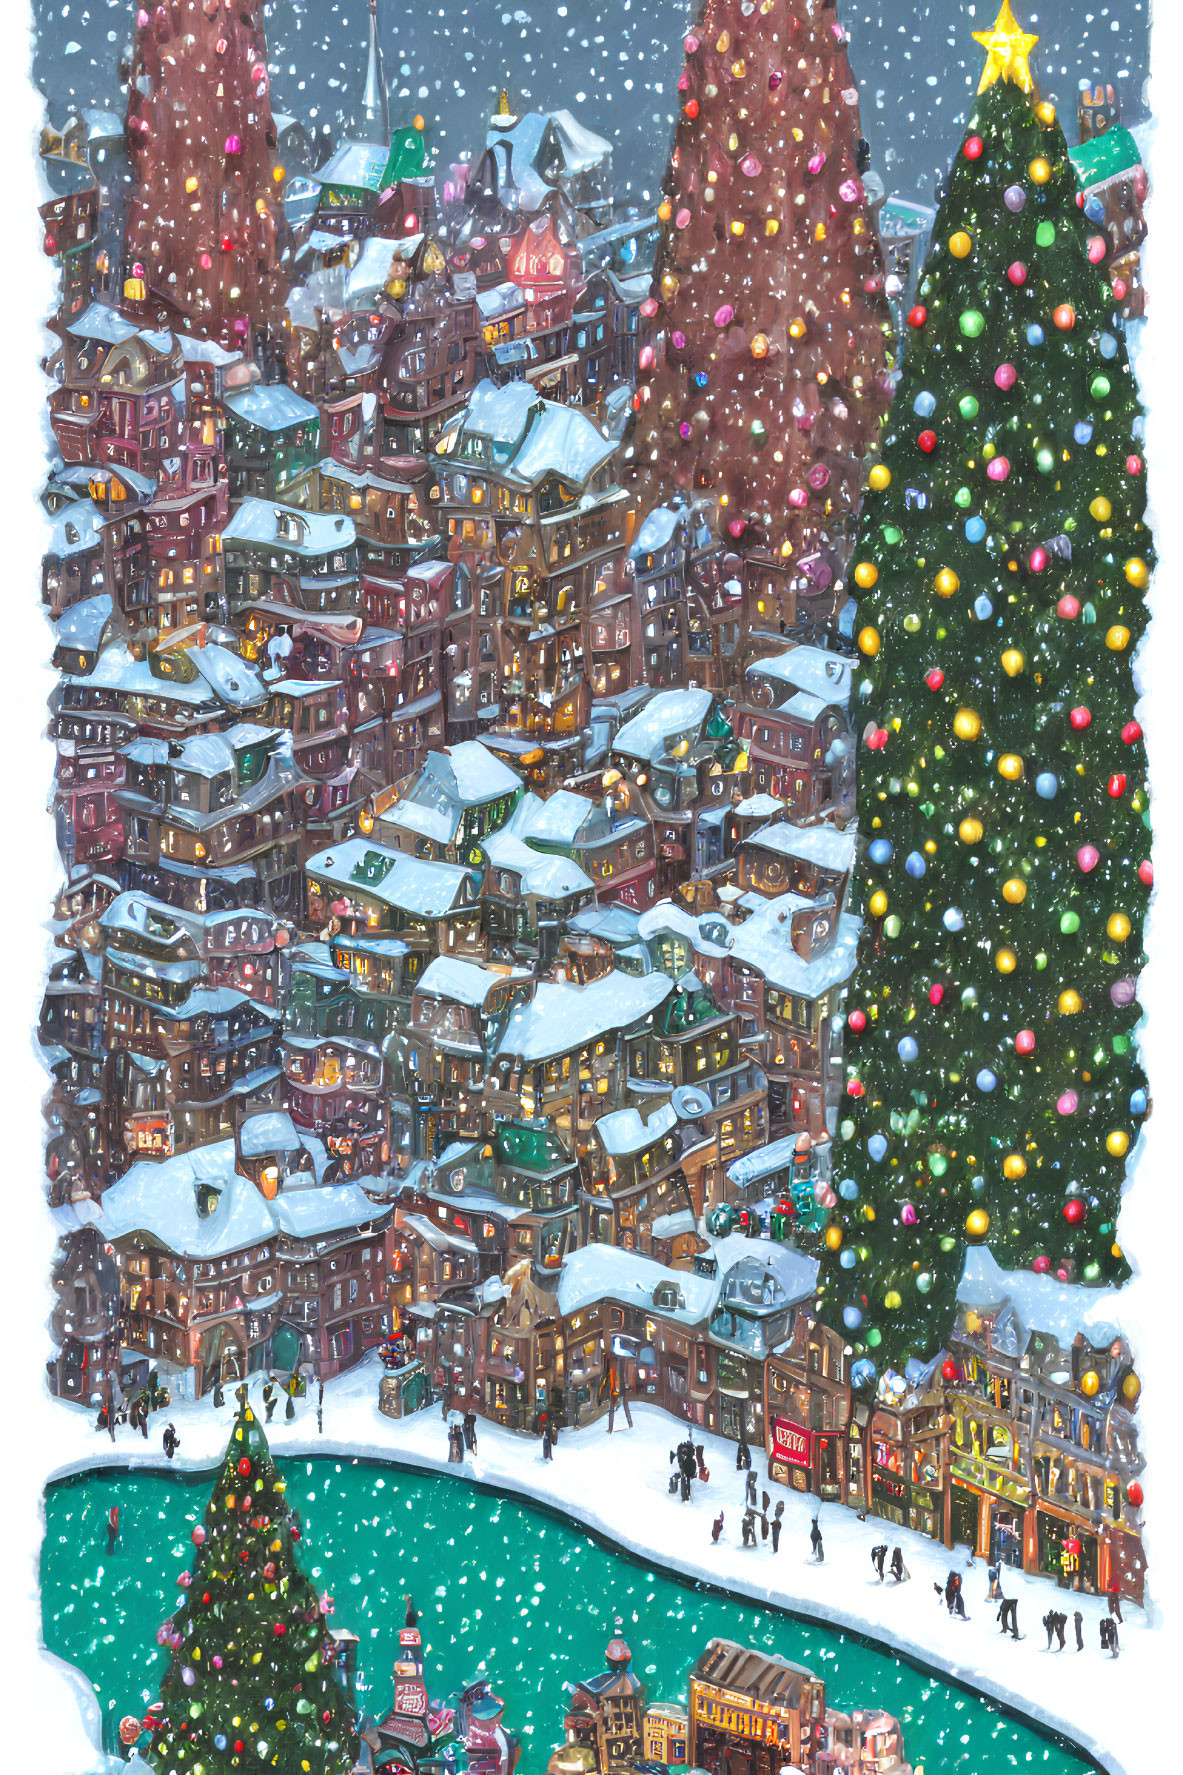 Snow-covered buildings and Christmas tree in festive winter scene